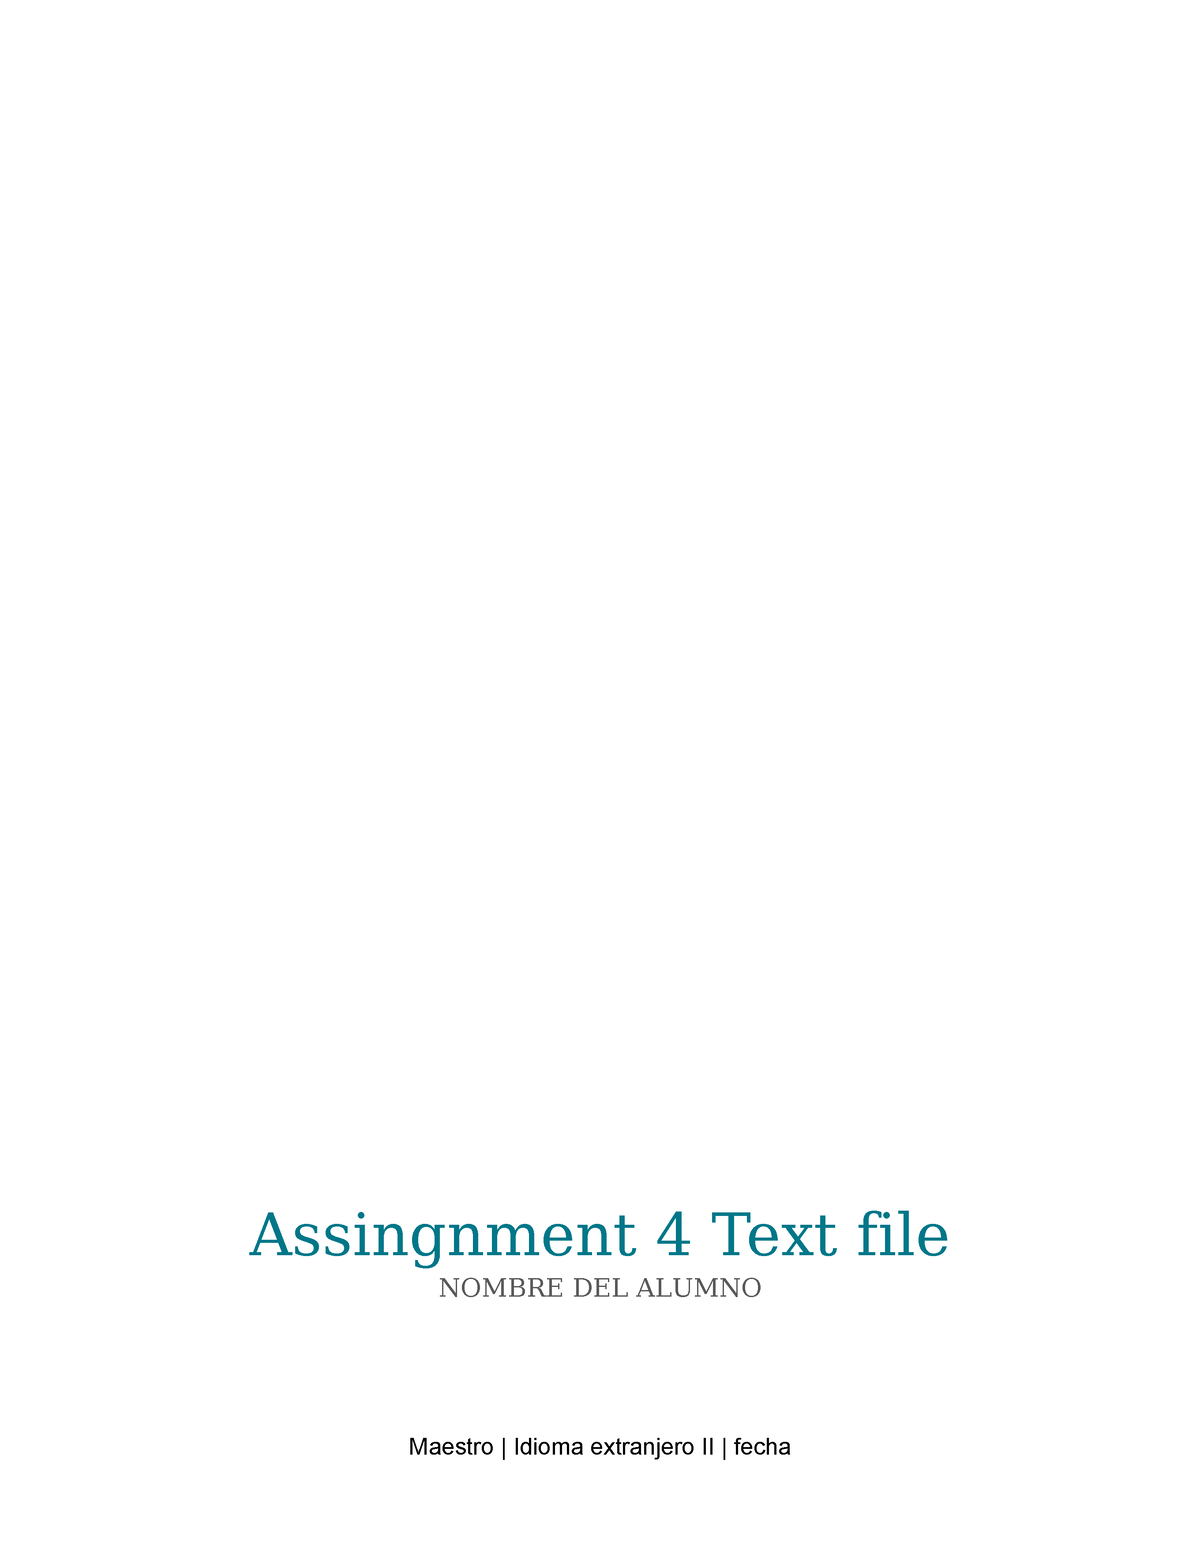 assignment 4 text file uveg ingles 2